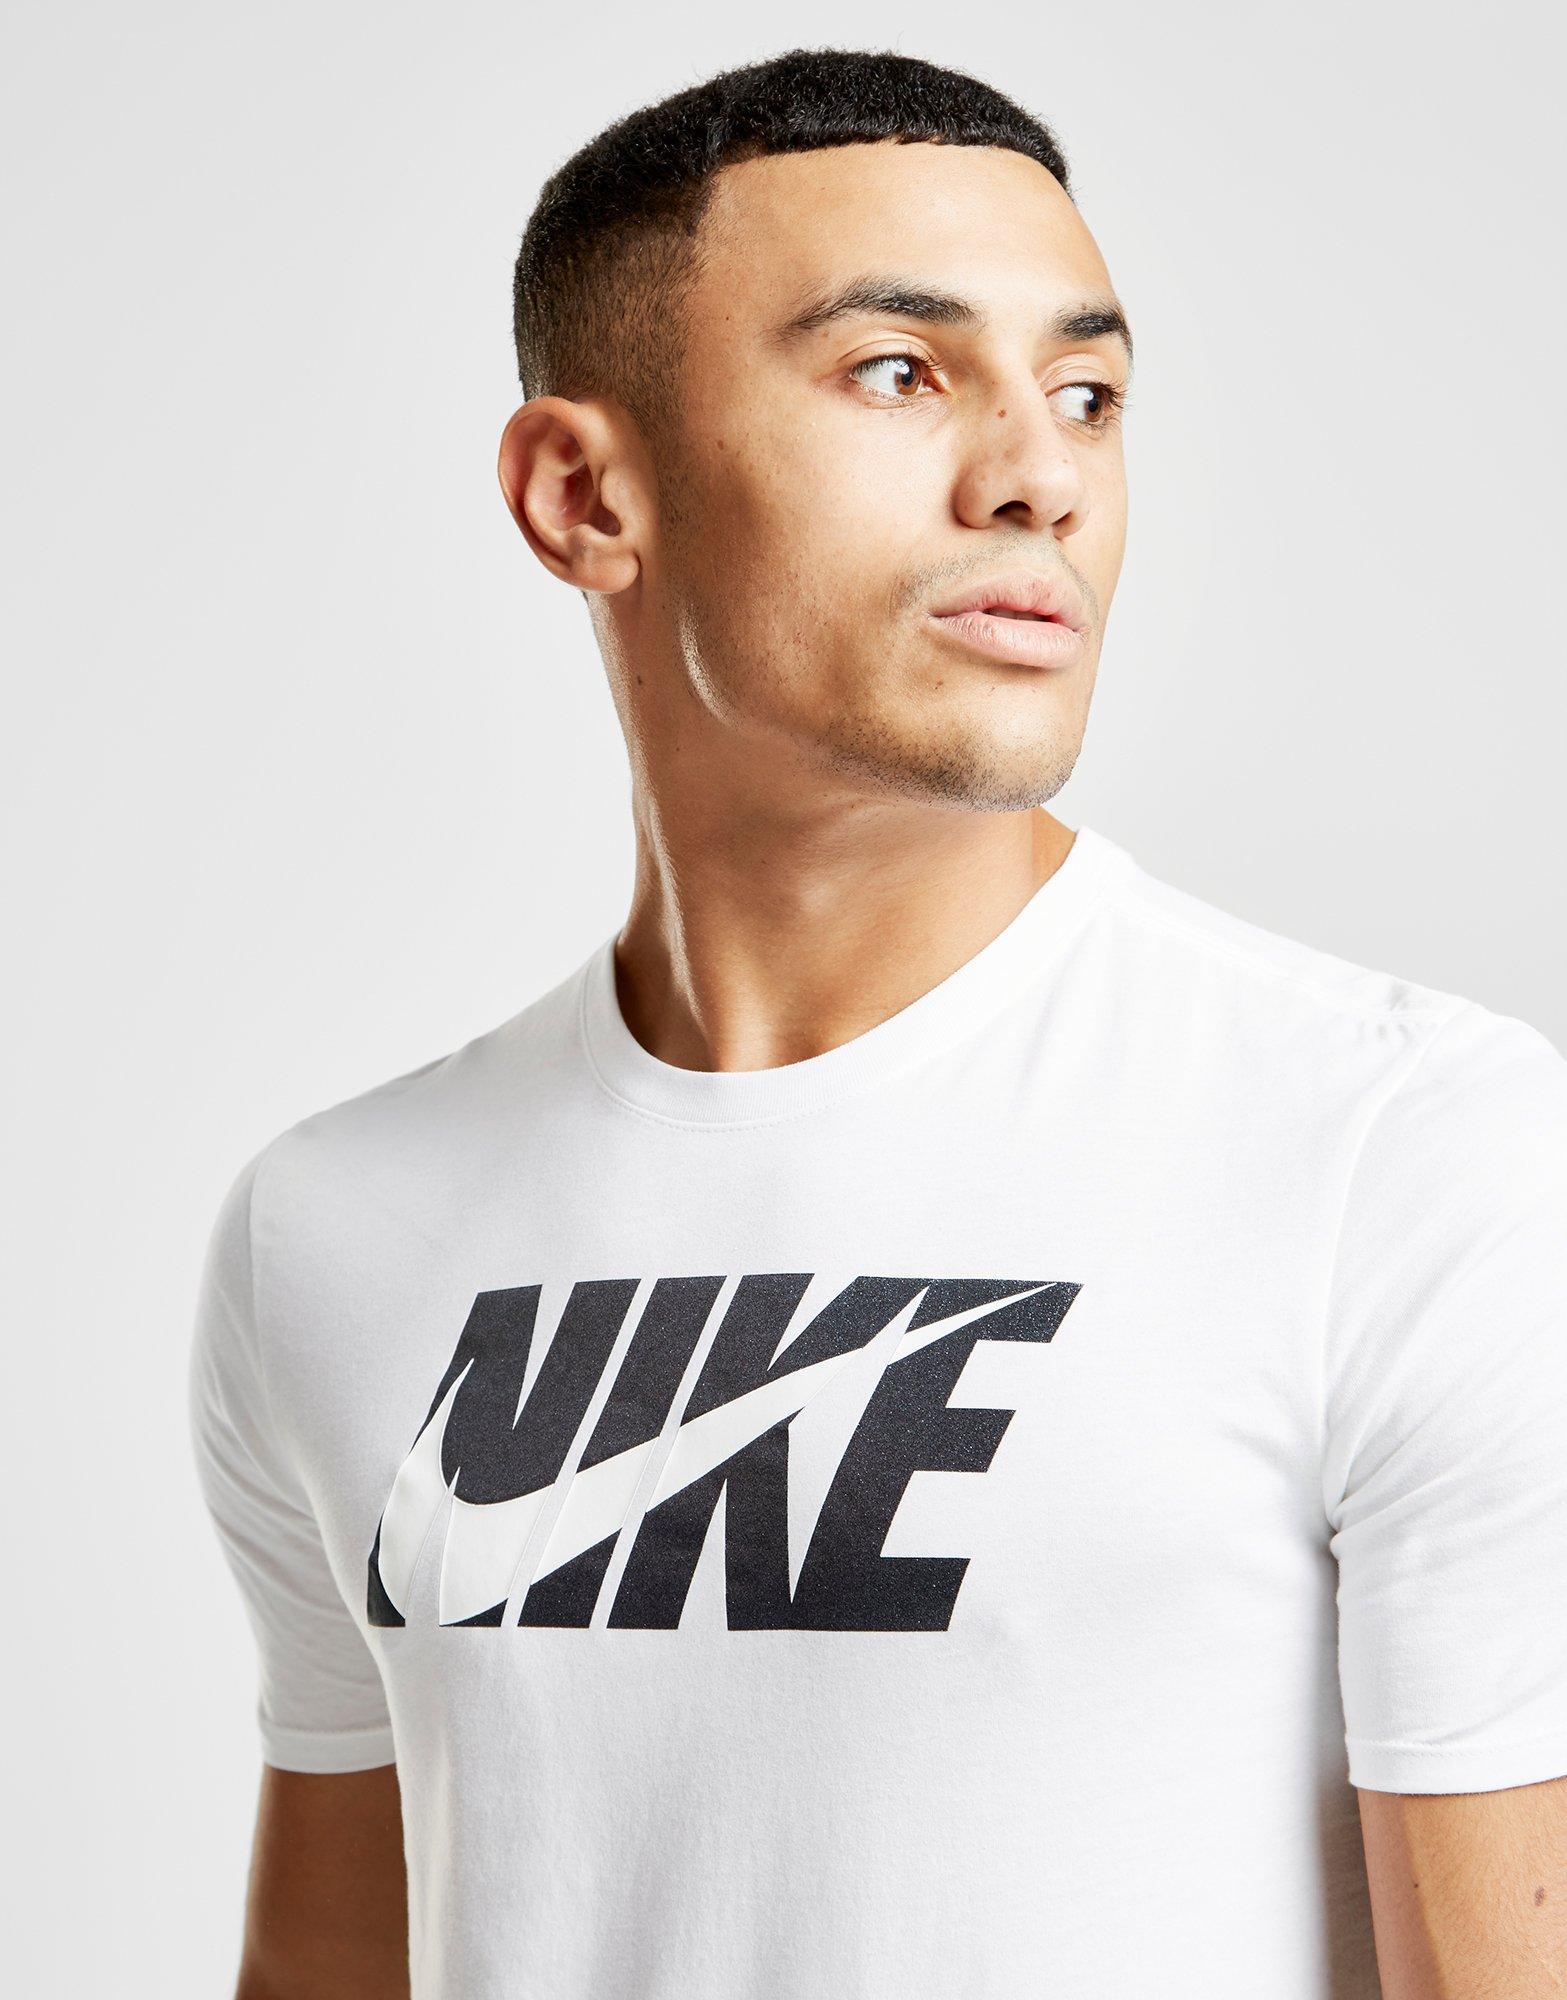 jd mens nike t shirtsUltimate Special Offers – 2021 New Fashion ...